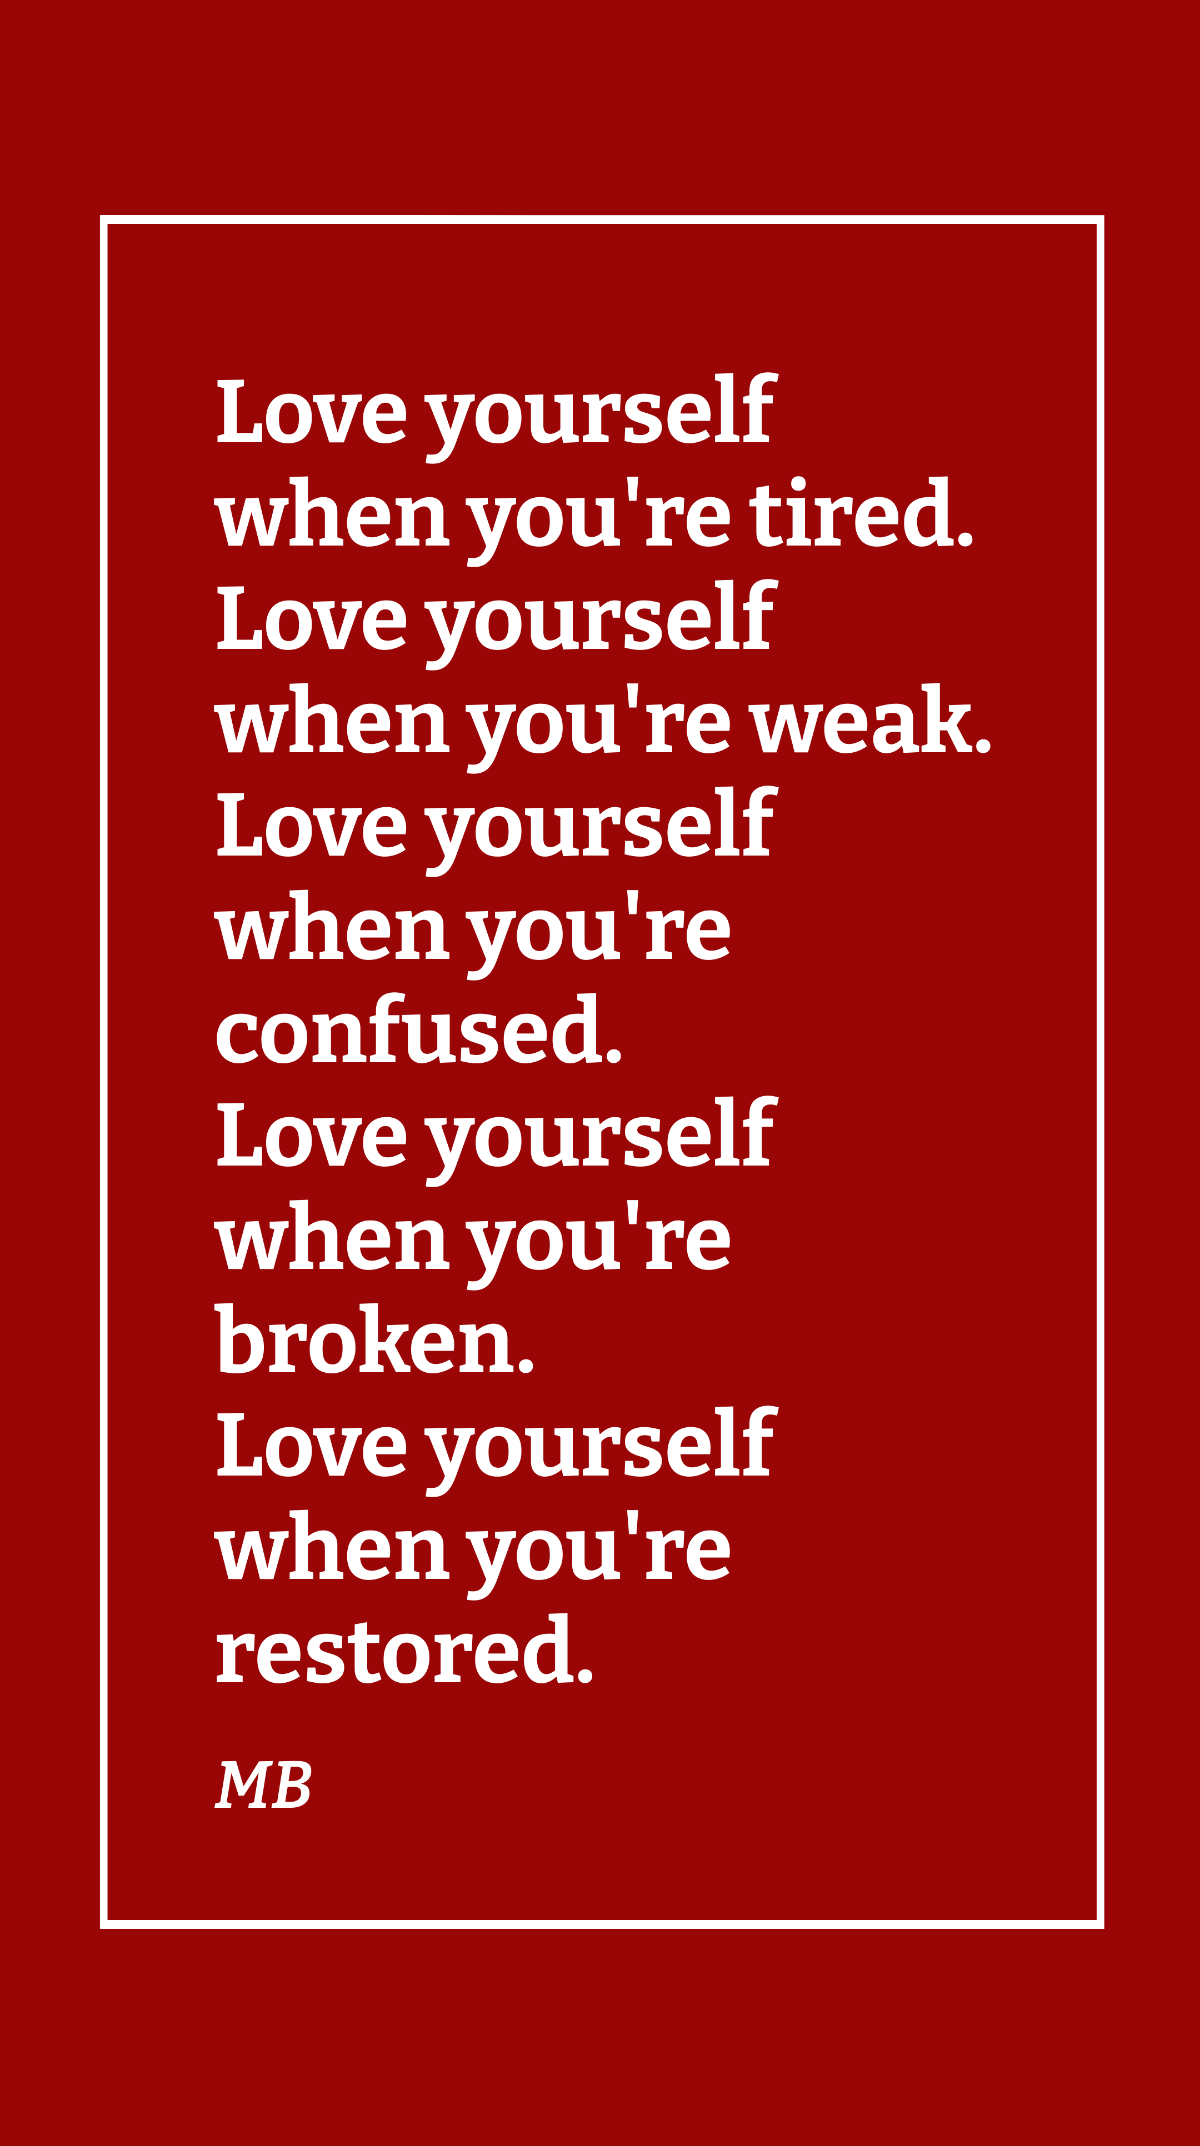 Free MB - Love yourself when you're tired. Love yourself when you're weak. Love yourself when you're confused. Love yourself when you're broken. Love yourself when you're restored. Template